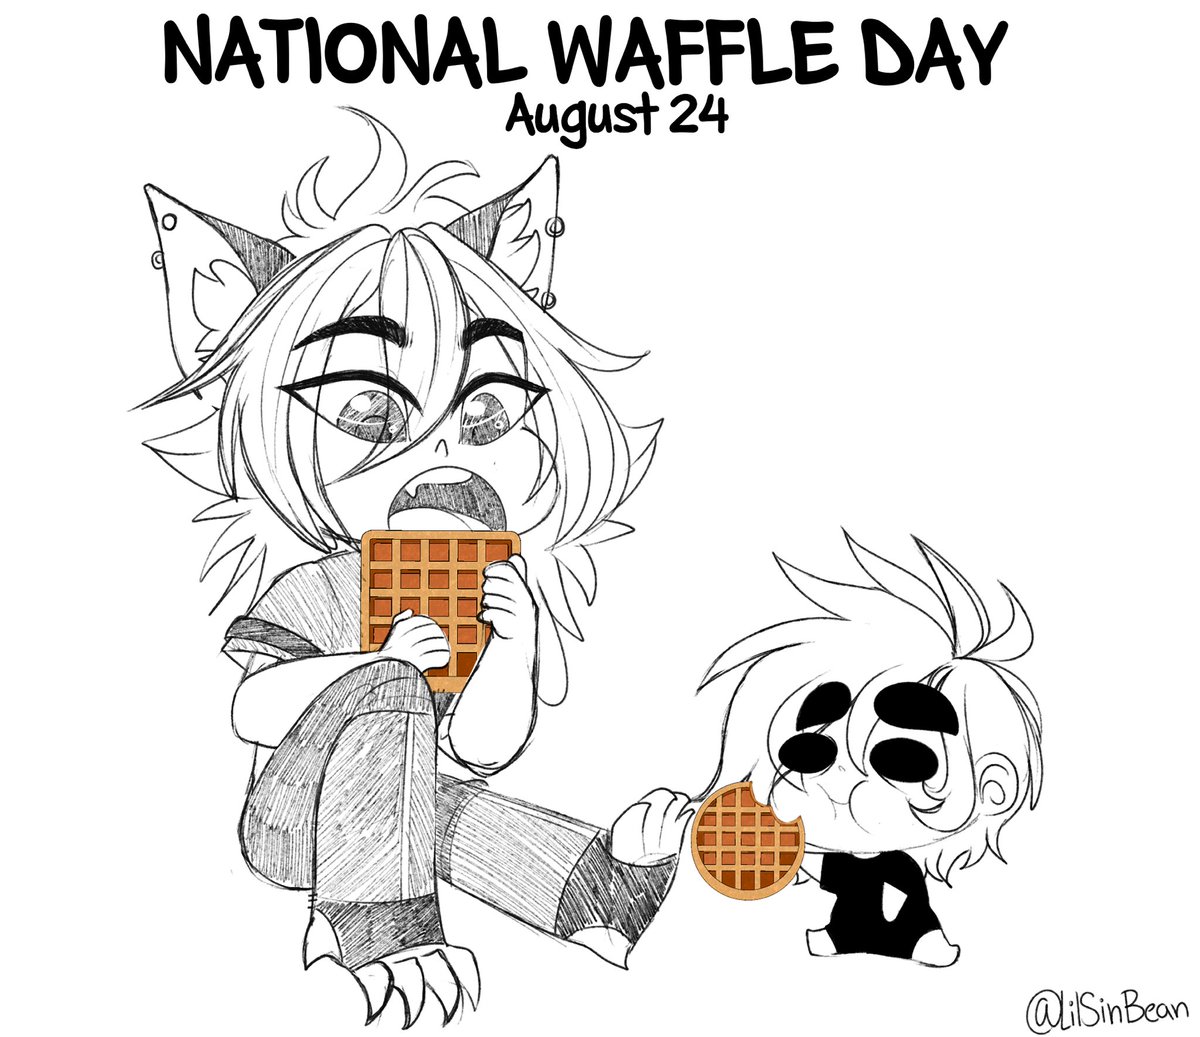 It’s #NationalWaffleDay 

What’s your favorite topping?

Art by: @LilSinBean